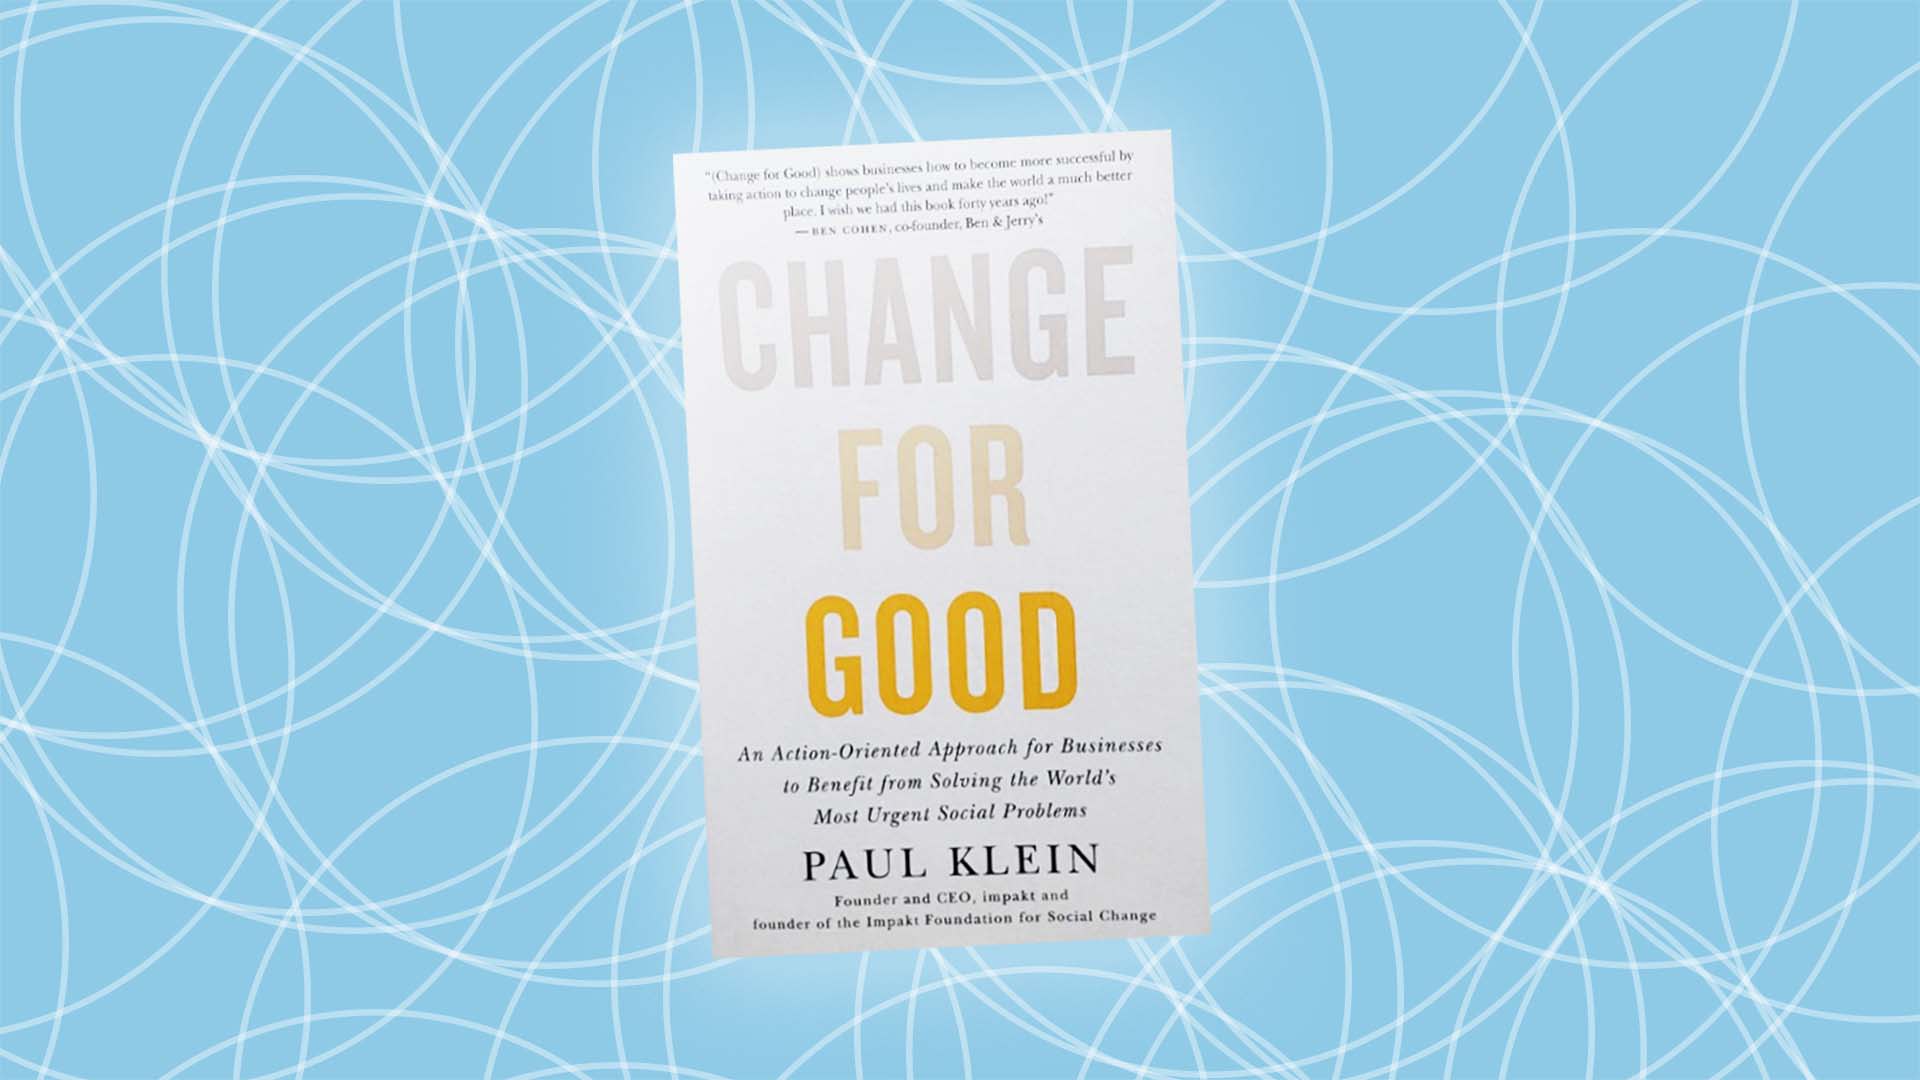 How to Make Change for Good